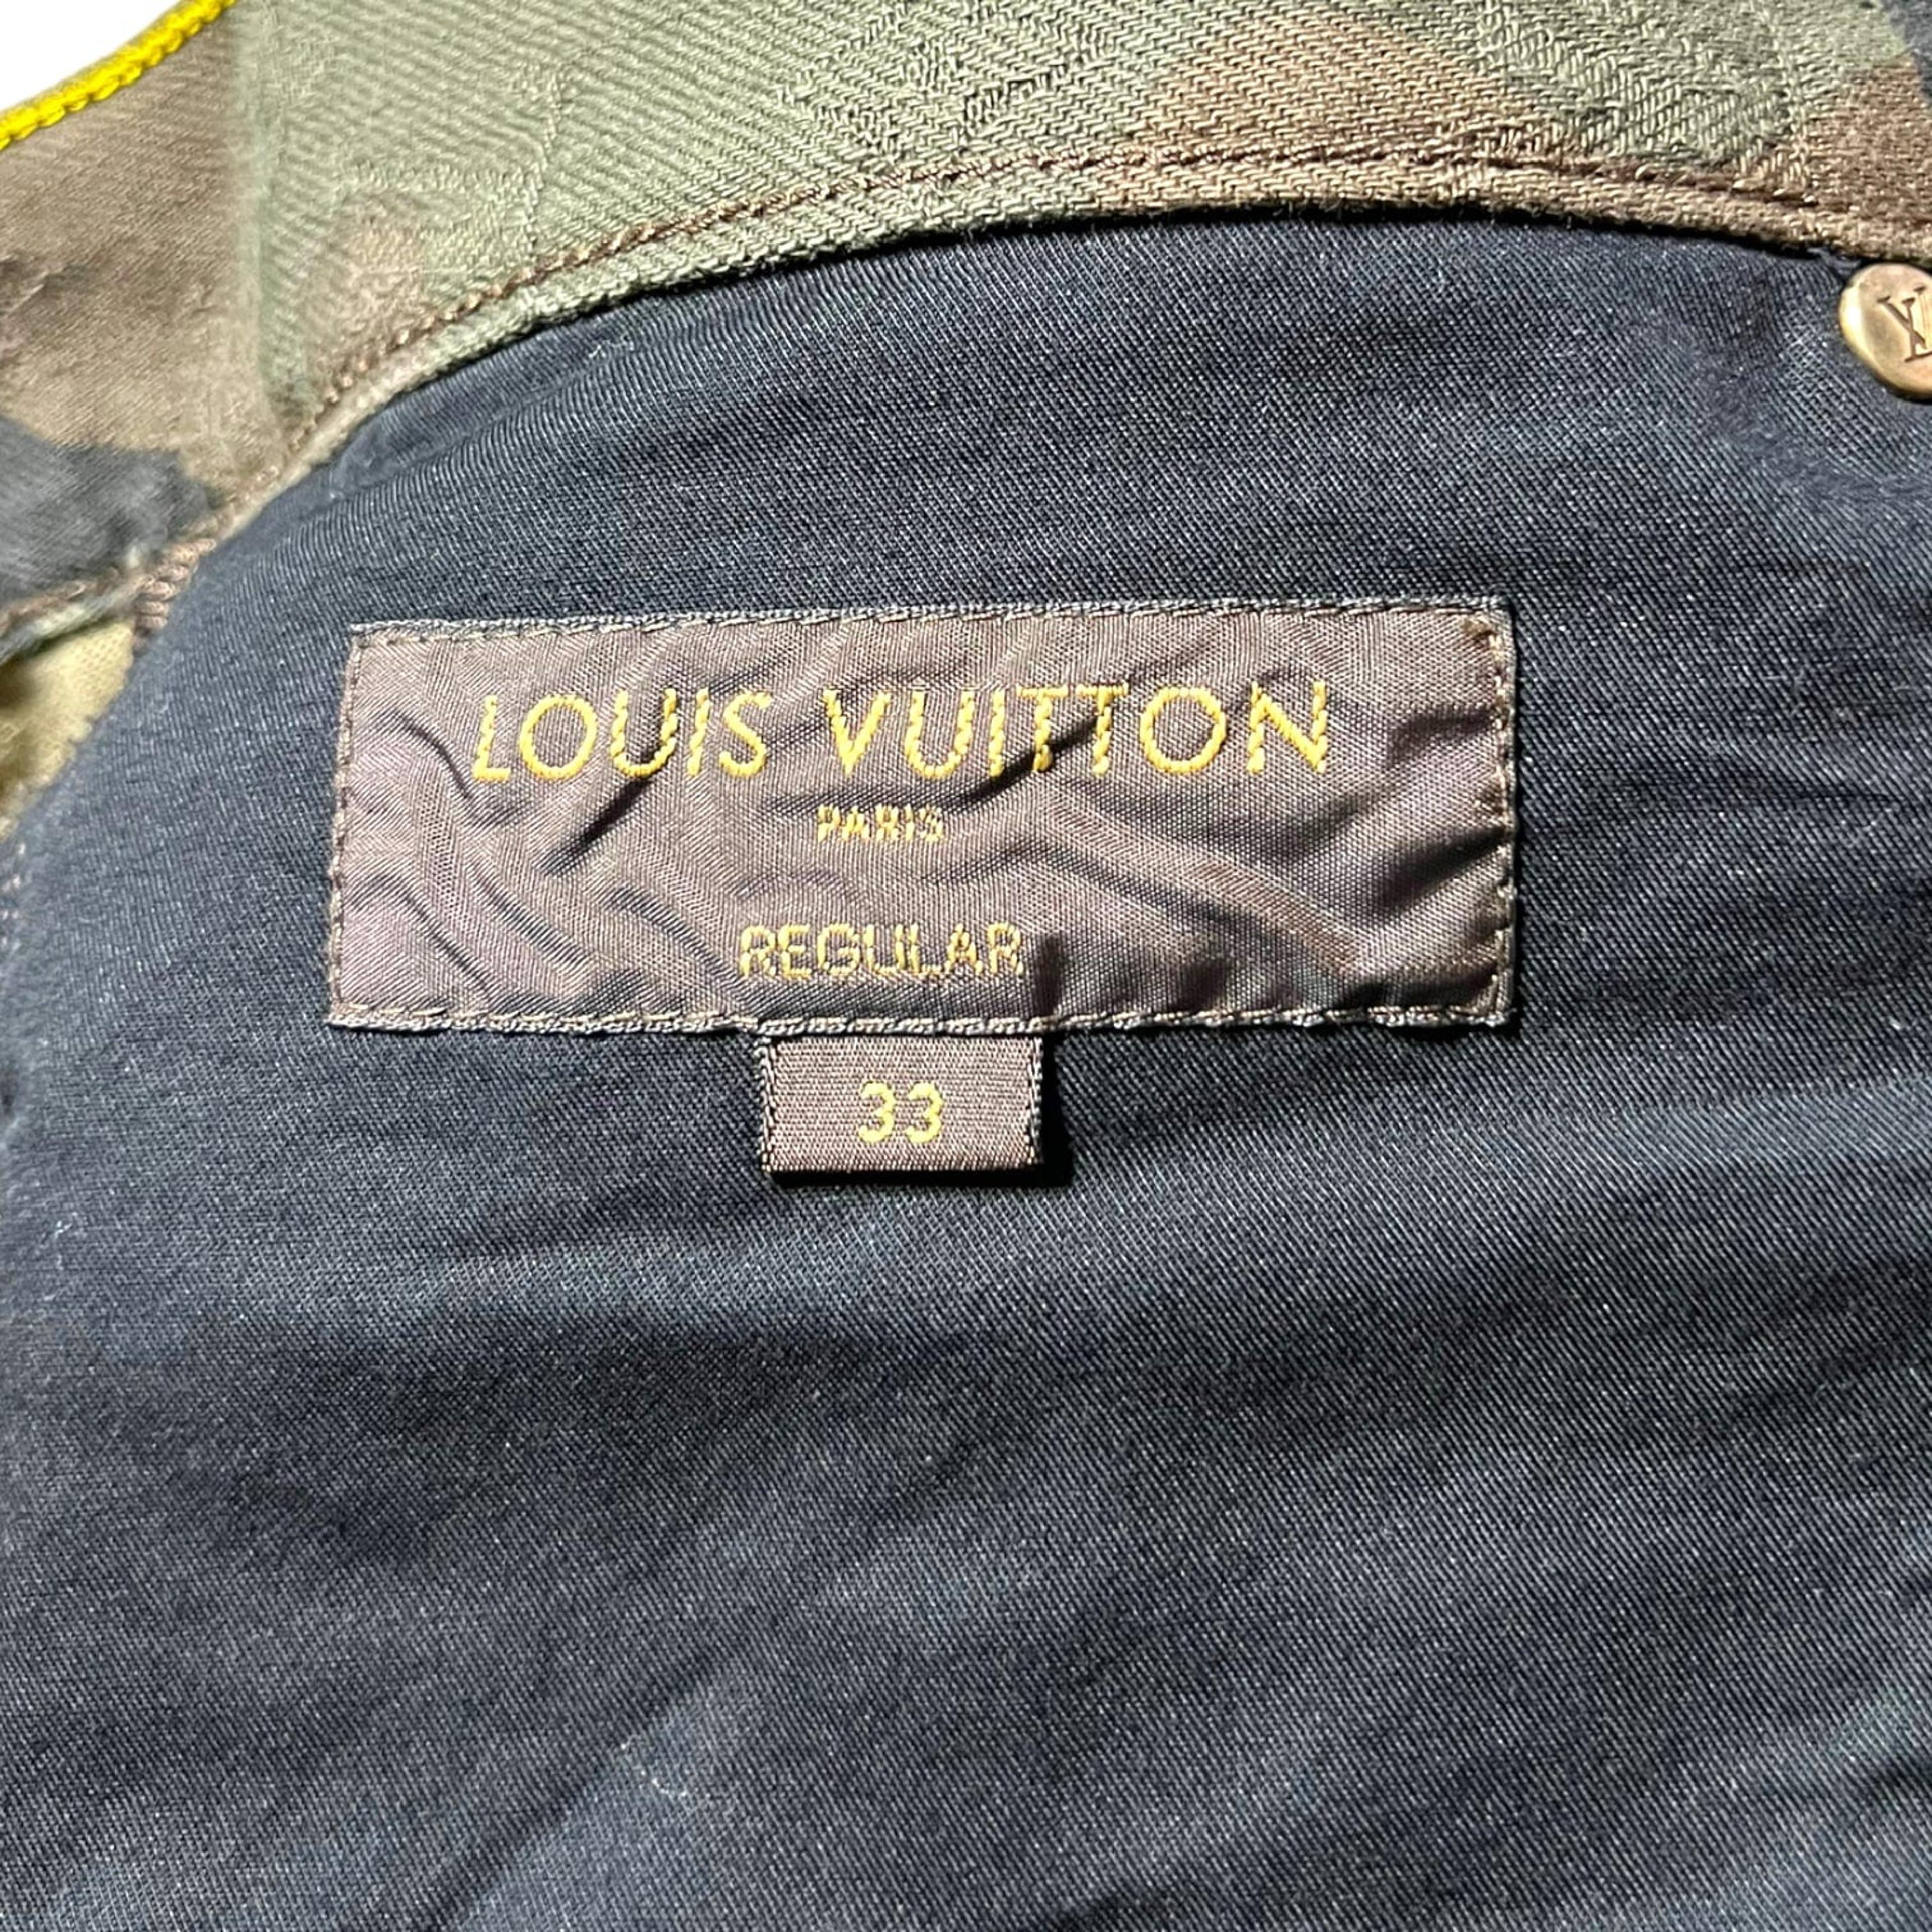 Alternate View 11 of Supreme x Louis Vuitton Jacquard Jeans Camouflage